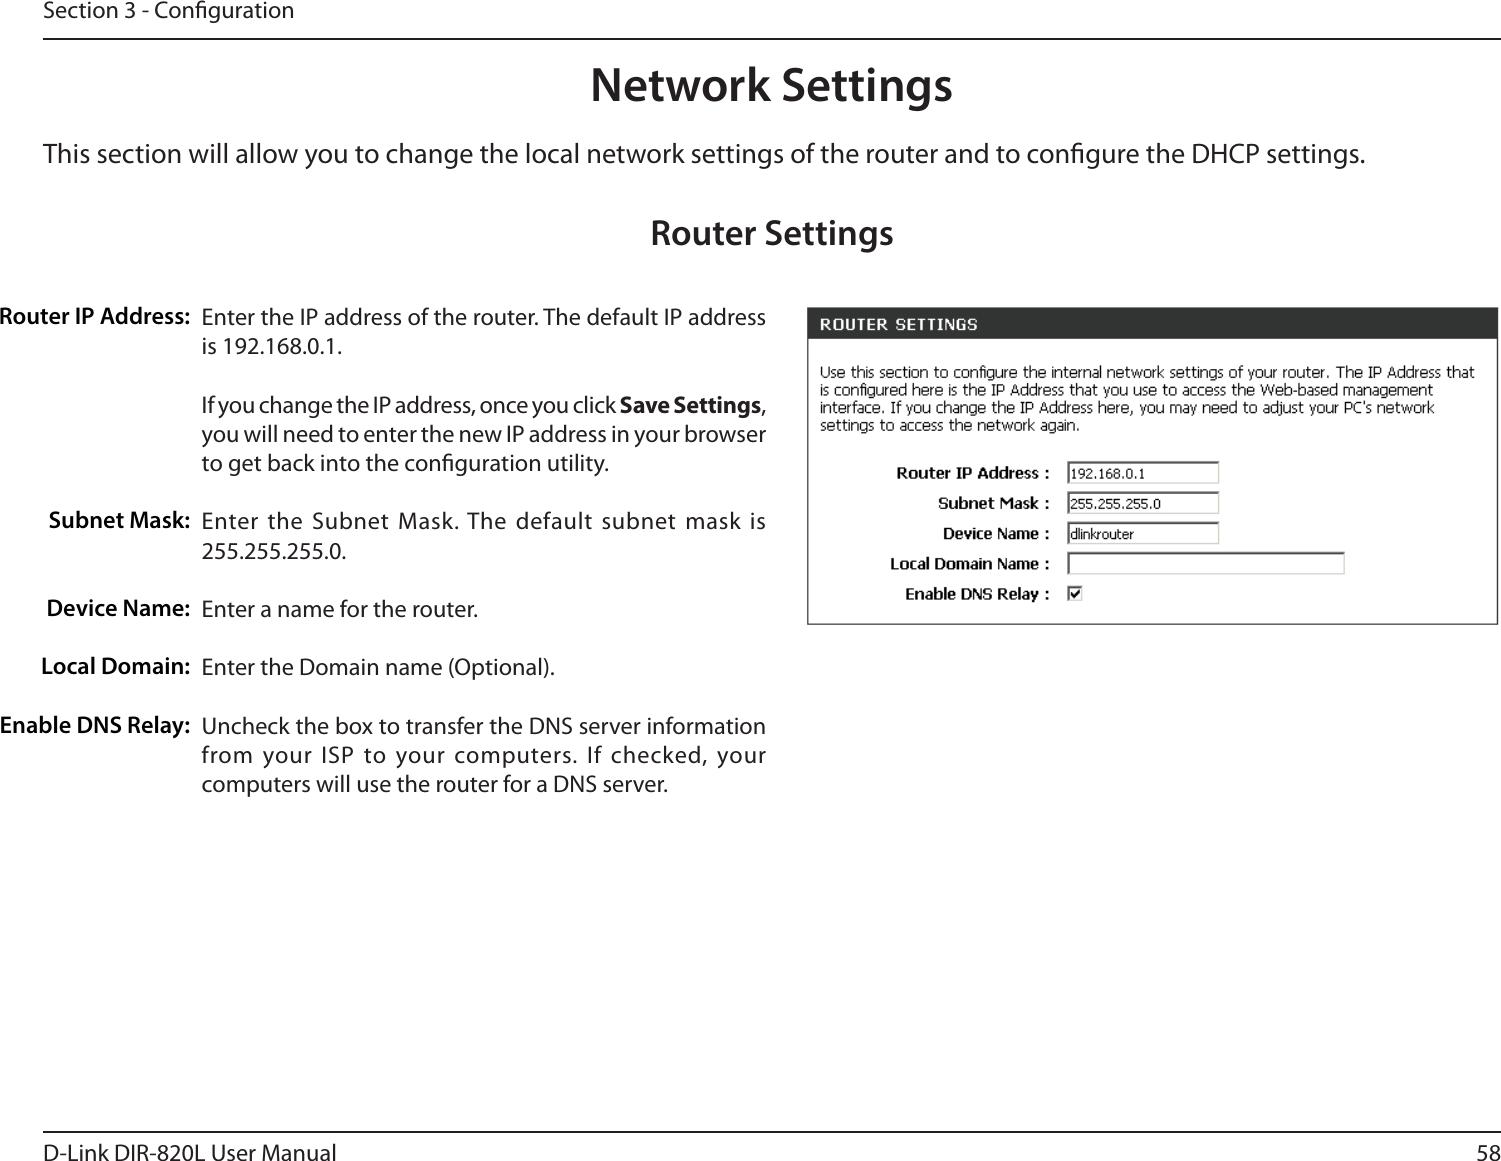 58D-Link DIR-820L User ManualSection 3 - CongurationThis section will allow you to change the local network settings of the router and to congure the DHCP settings.Network SettingsEnter the IP address of the router. The default IP address is 192.168.0.1.If you change the IP address, once you click Save Settings, you will need to enter the new IP address in your browser to get back into the conguration utility.Enter the Subnet Mask. The default subnet mask is 255.255.255.0.Enter a name for the router.Enter the Domain name (Optional).Uncheck the box to transfer the DNS server information from your ISP to your computers. If checked, your computers will use the router for a DNS server.Router IP Address:Subnet Mask:Device Name:Local Domain:Enable DNS Relay:Router Settings